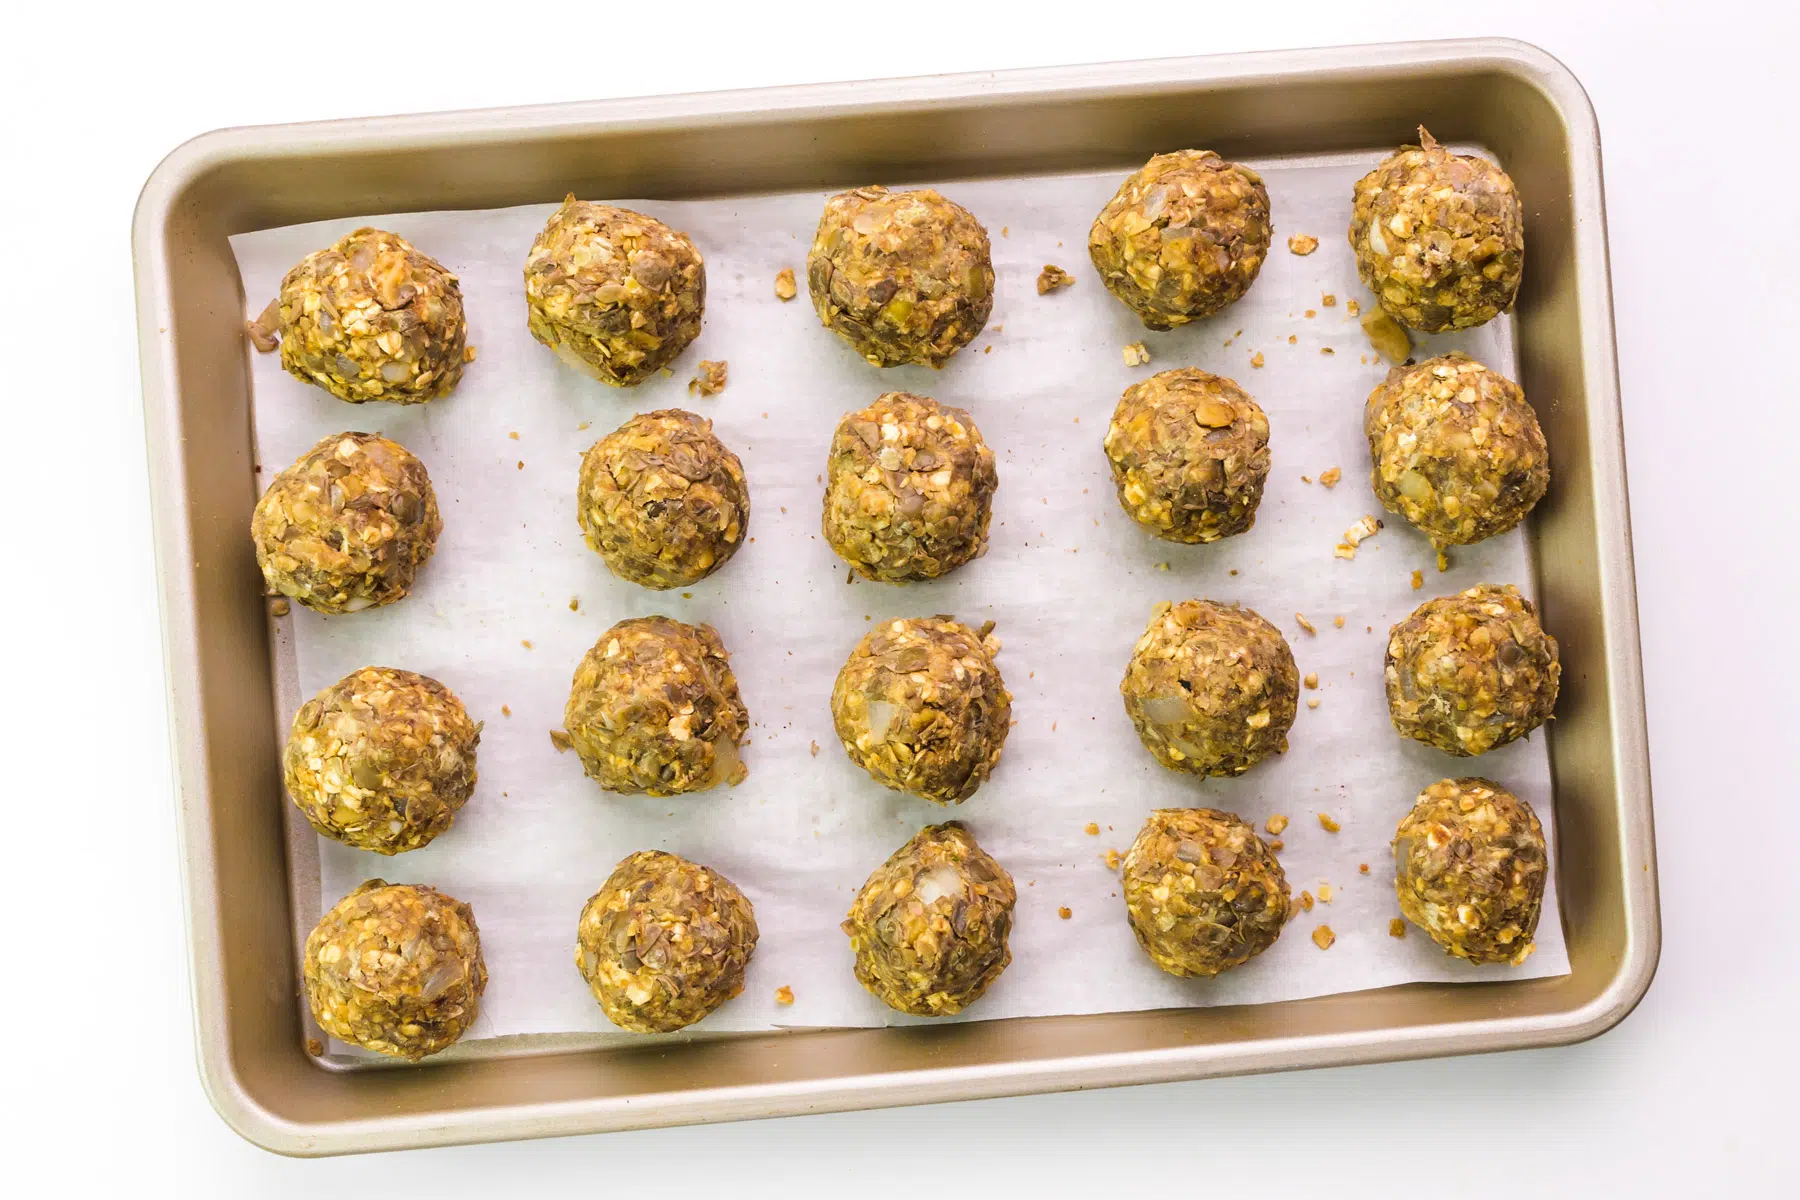 Lentil meatballs are on a baking sheet lined with parchment paper.